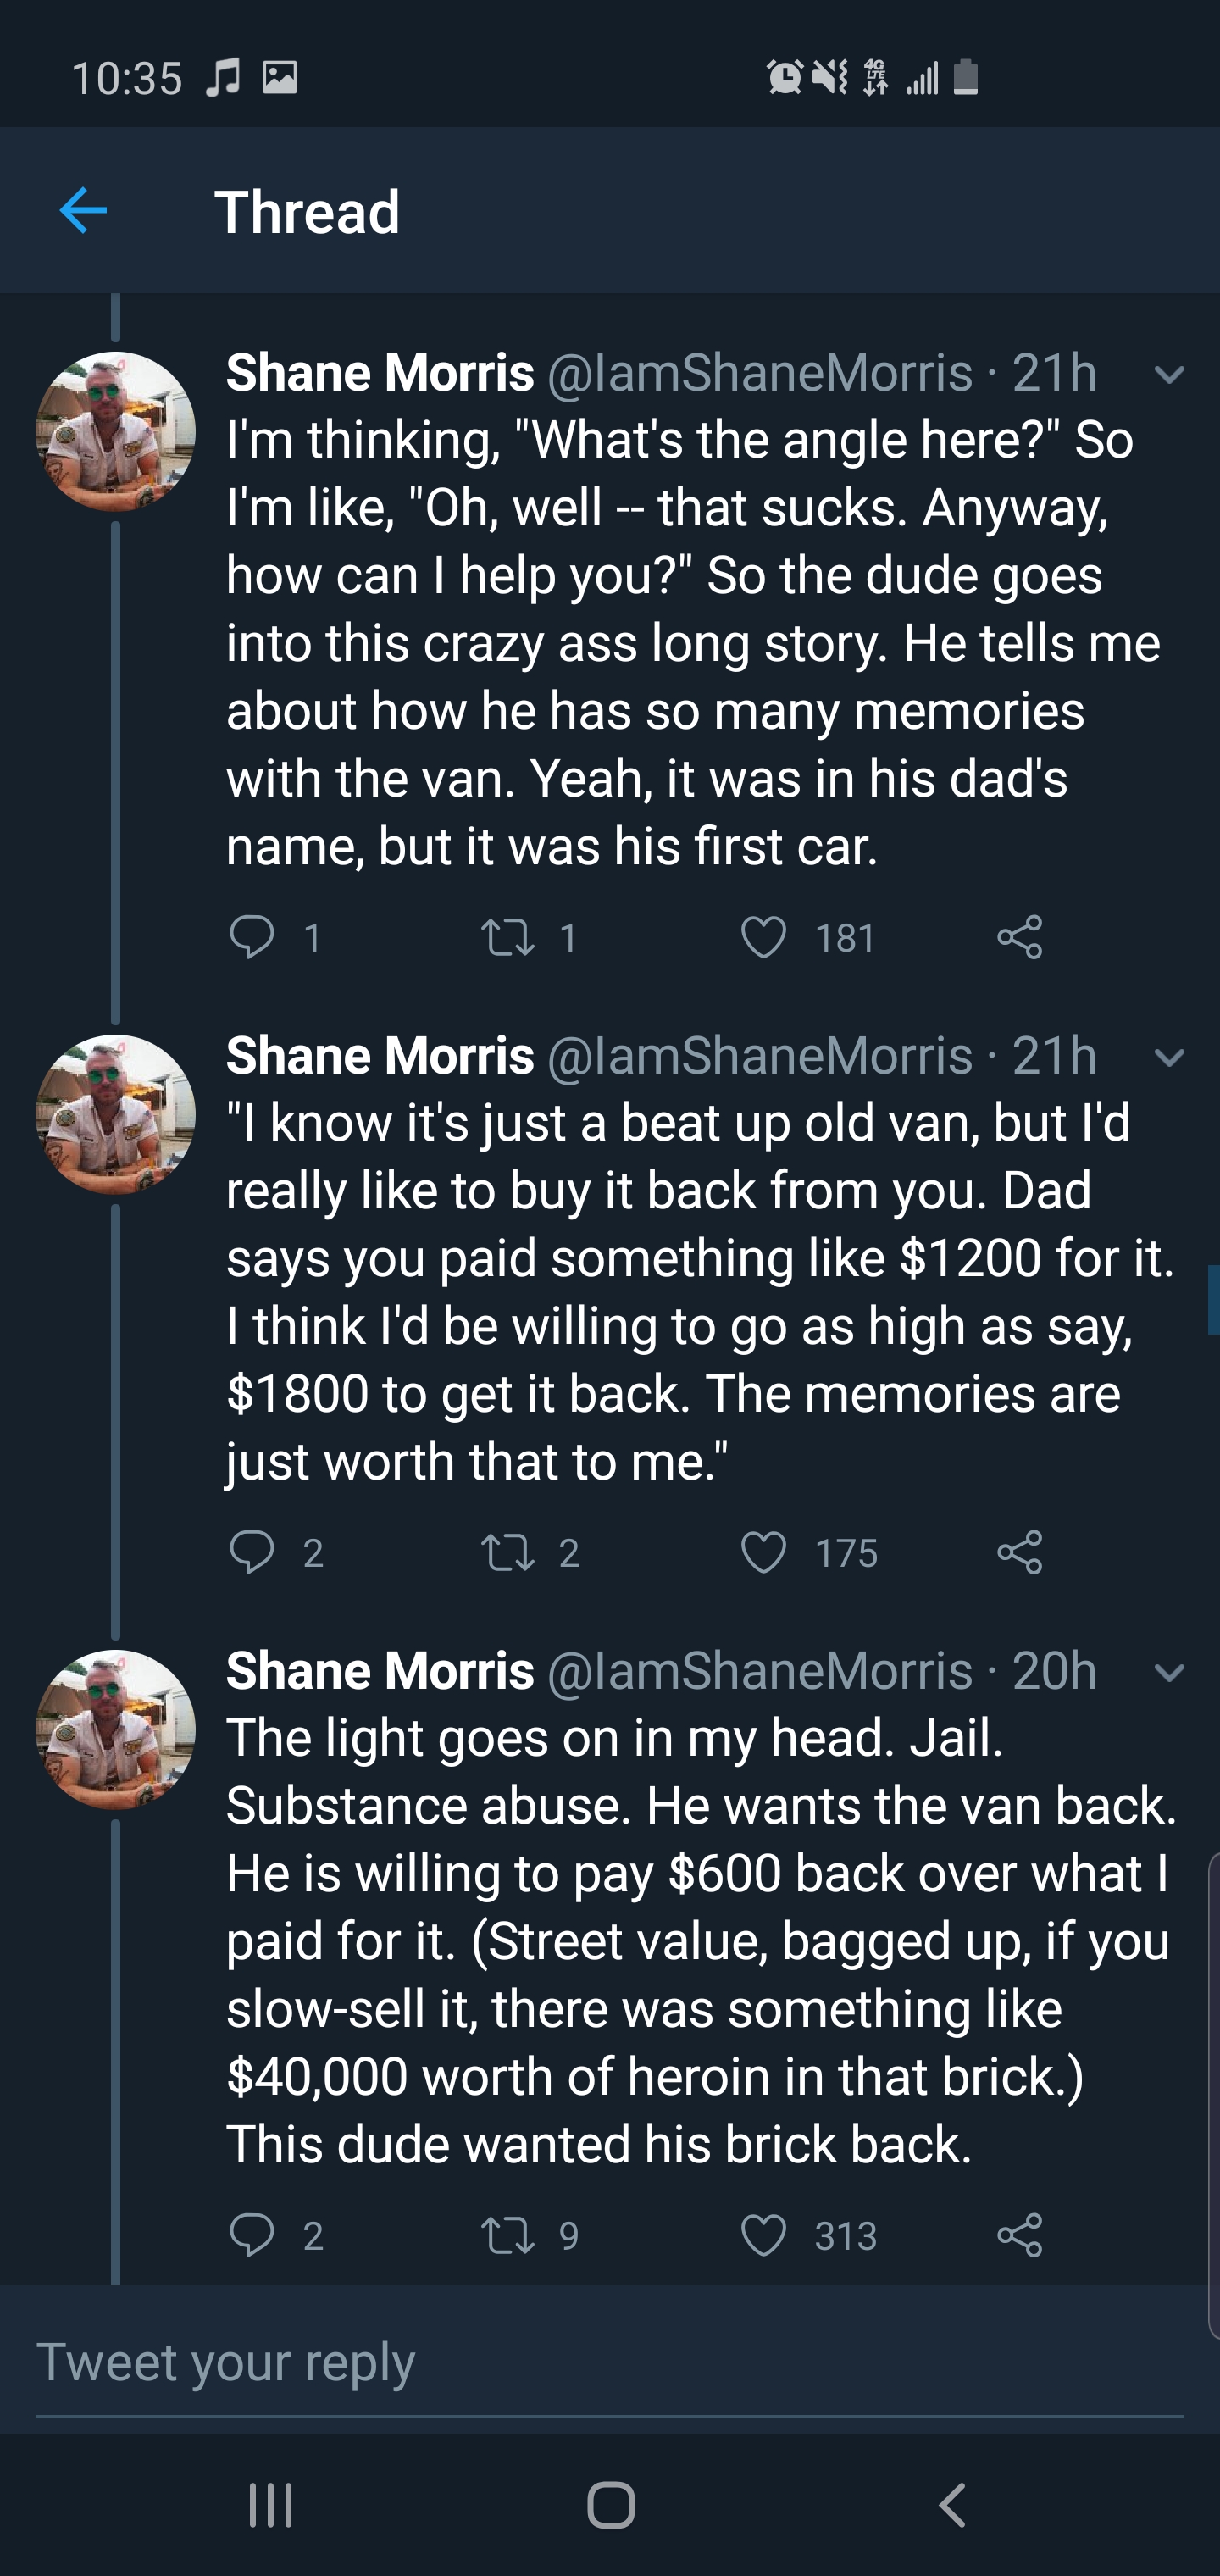 make fake heroin - A On Thread Shane Morris 21h I'm thinking, "What's the angle here? So I'm , "Oh, well that sucks. Anyway, how can I help you?' So the dude goes into this crazy ass long story. He tells me about how he has so many memories with the van. 